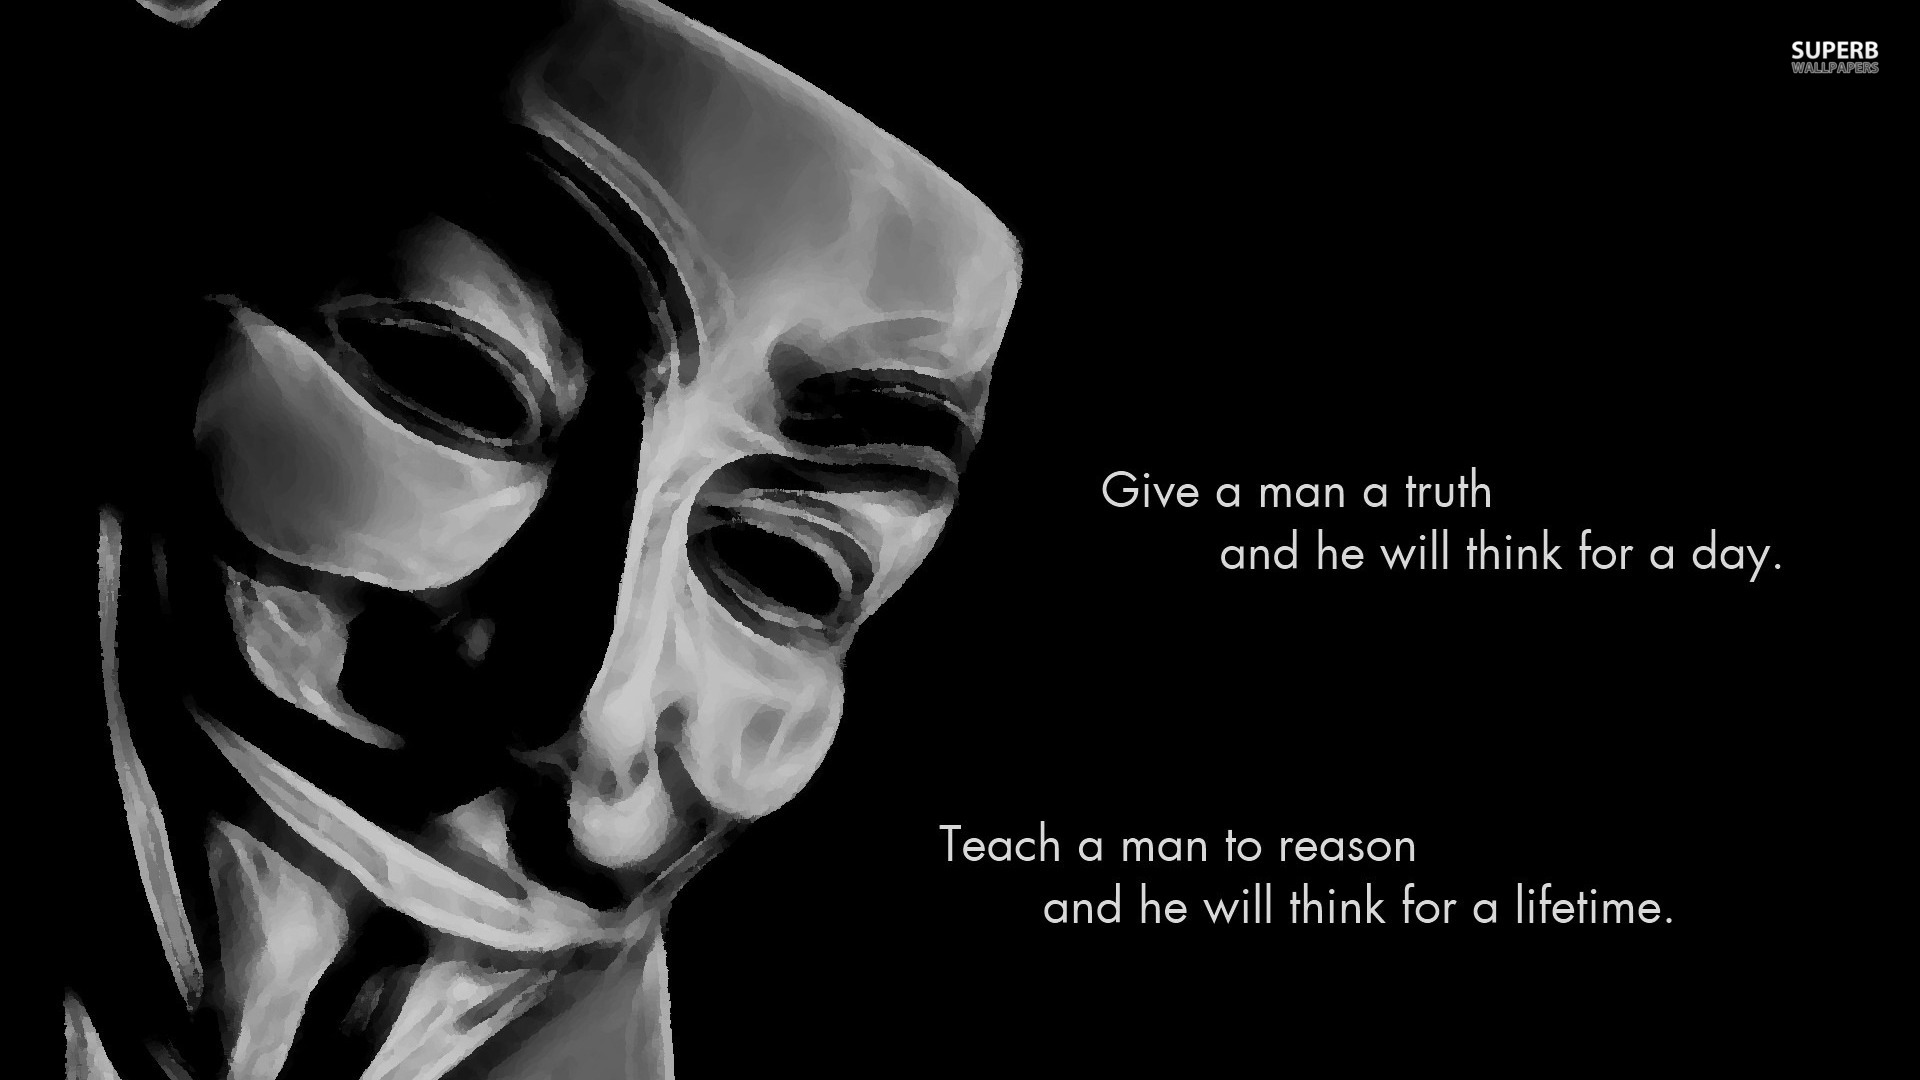 Give a man a truth... wallpaper - Typography wallpapers - #14916